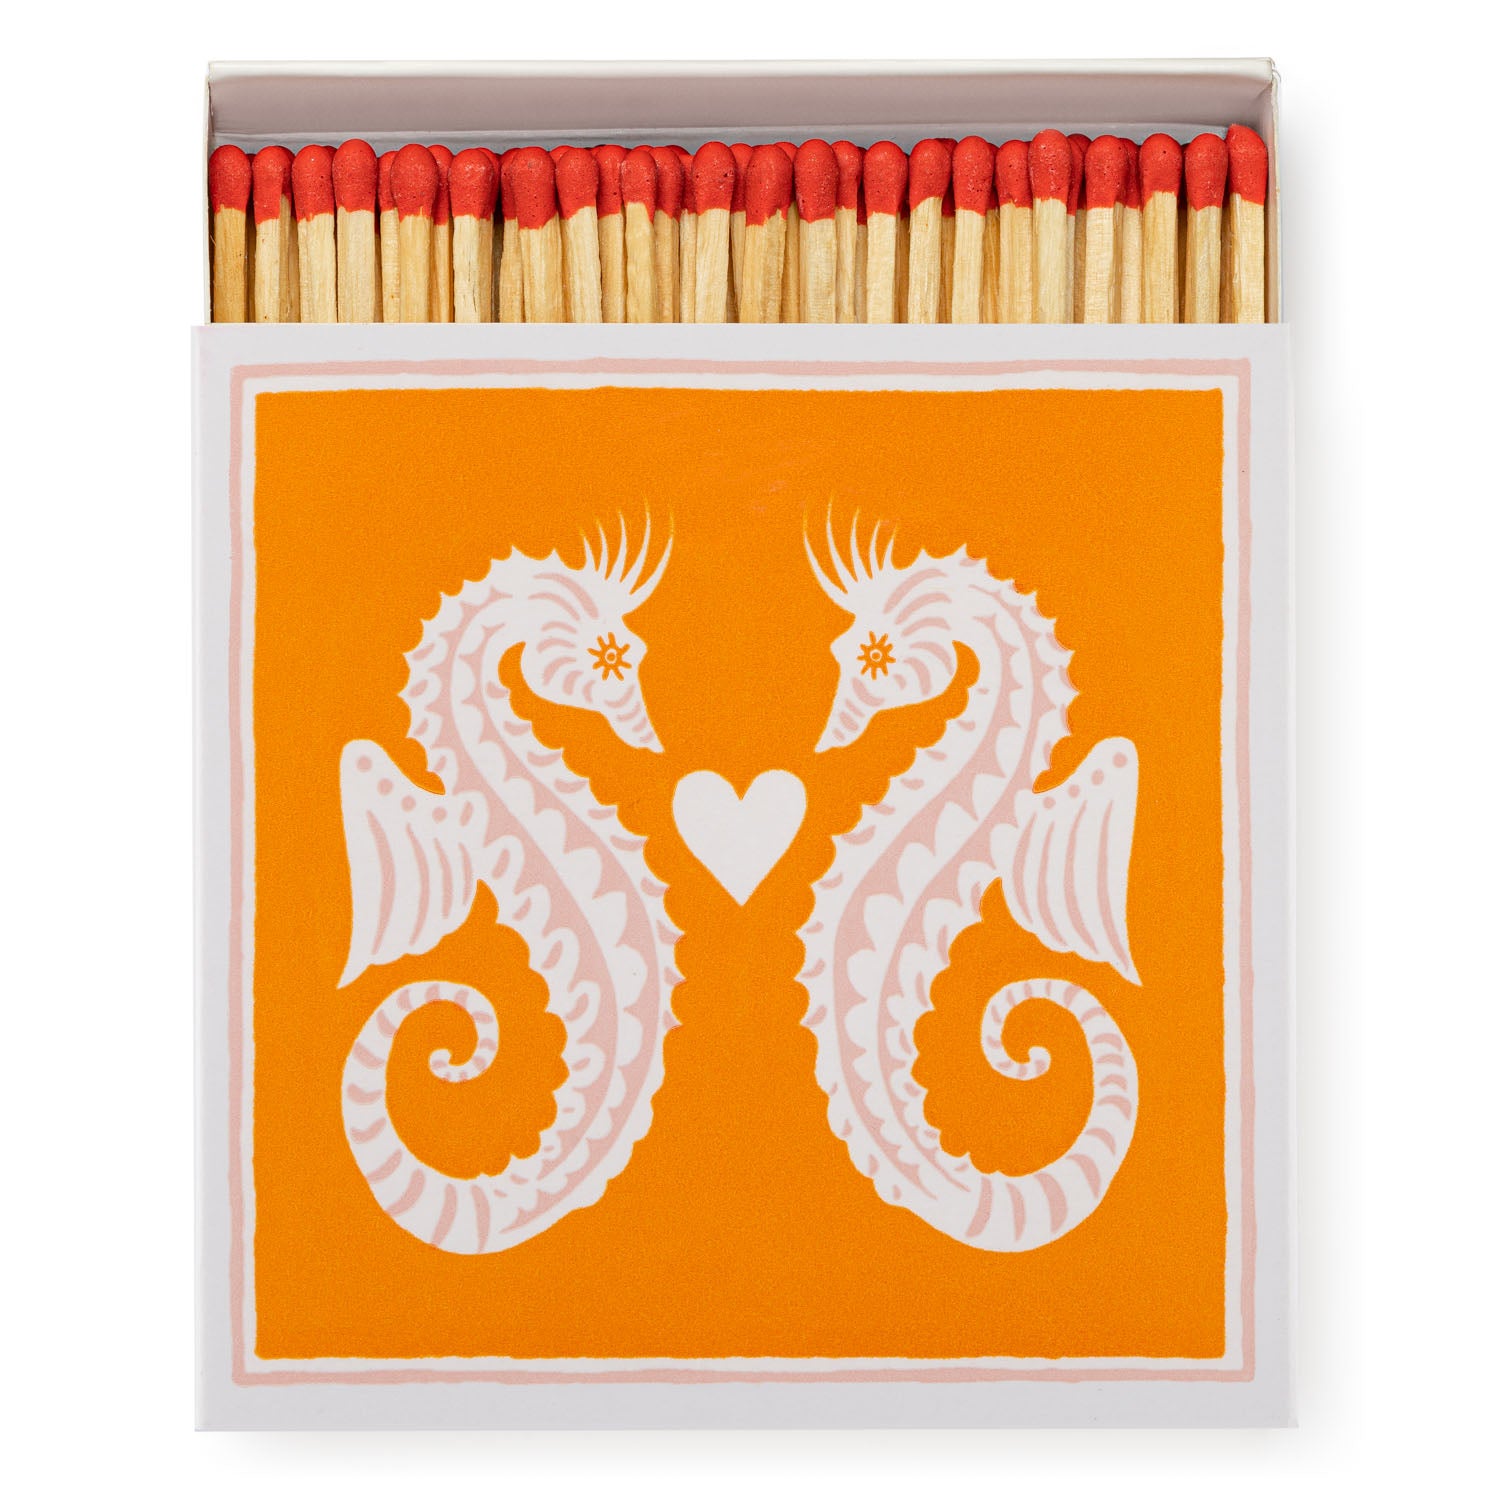 Sea Horses - Luxury Matches from The Archivist